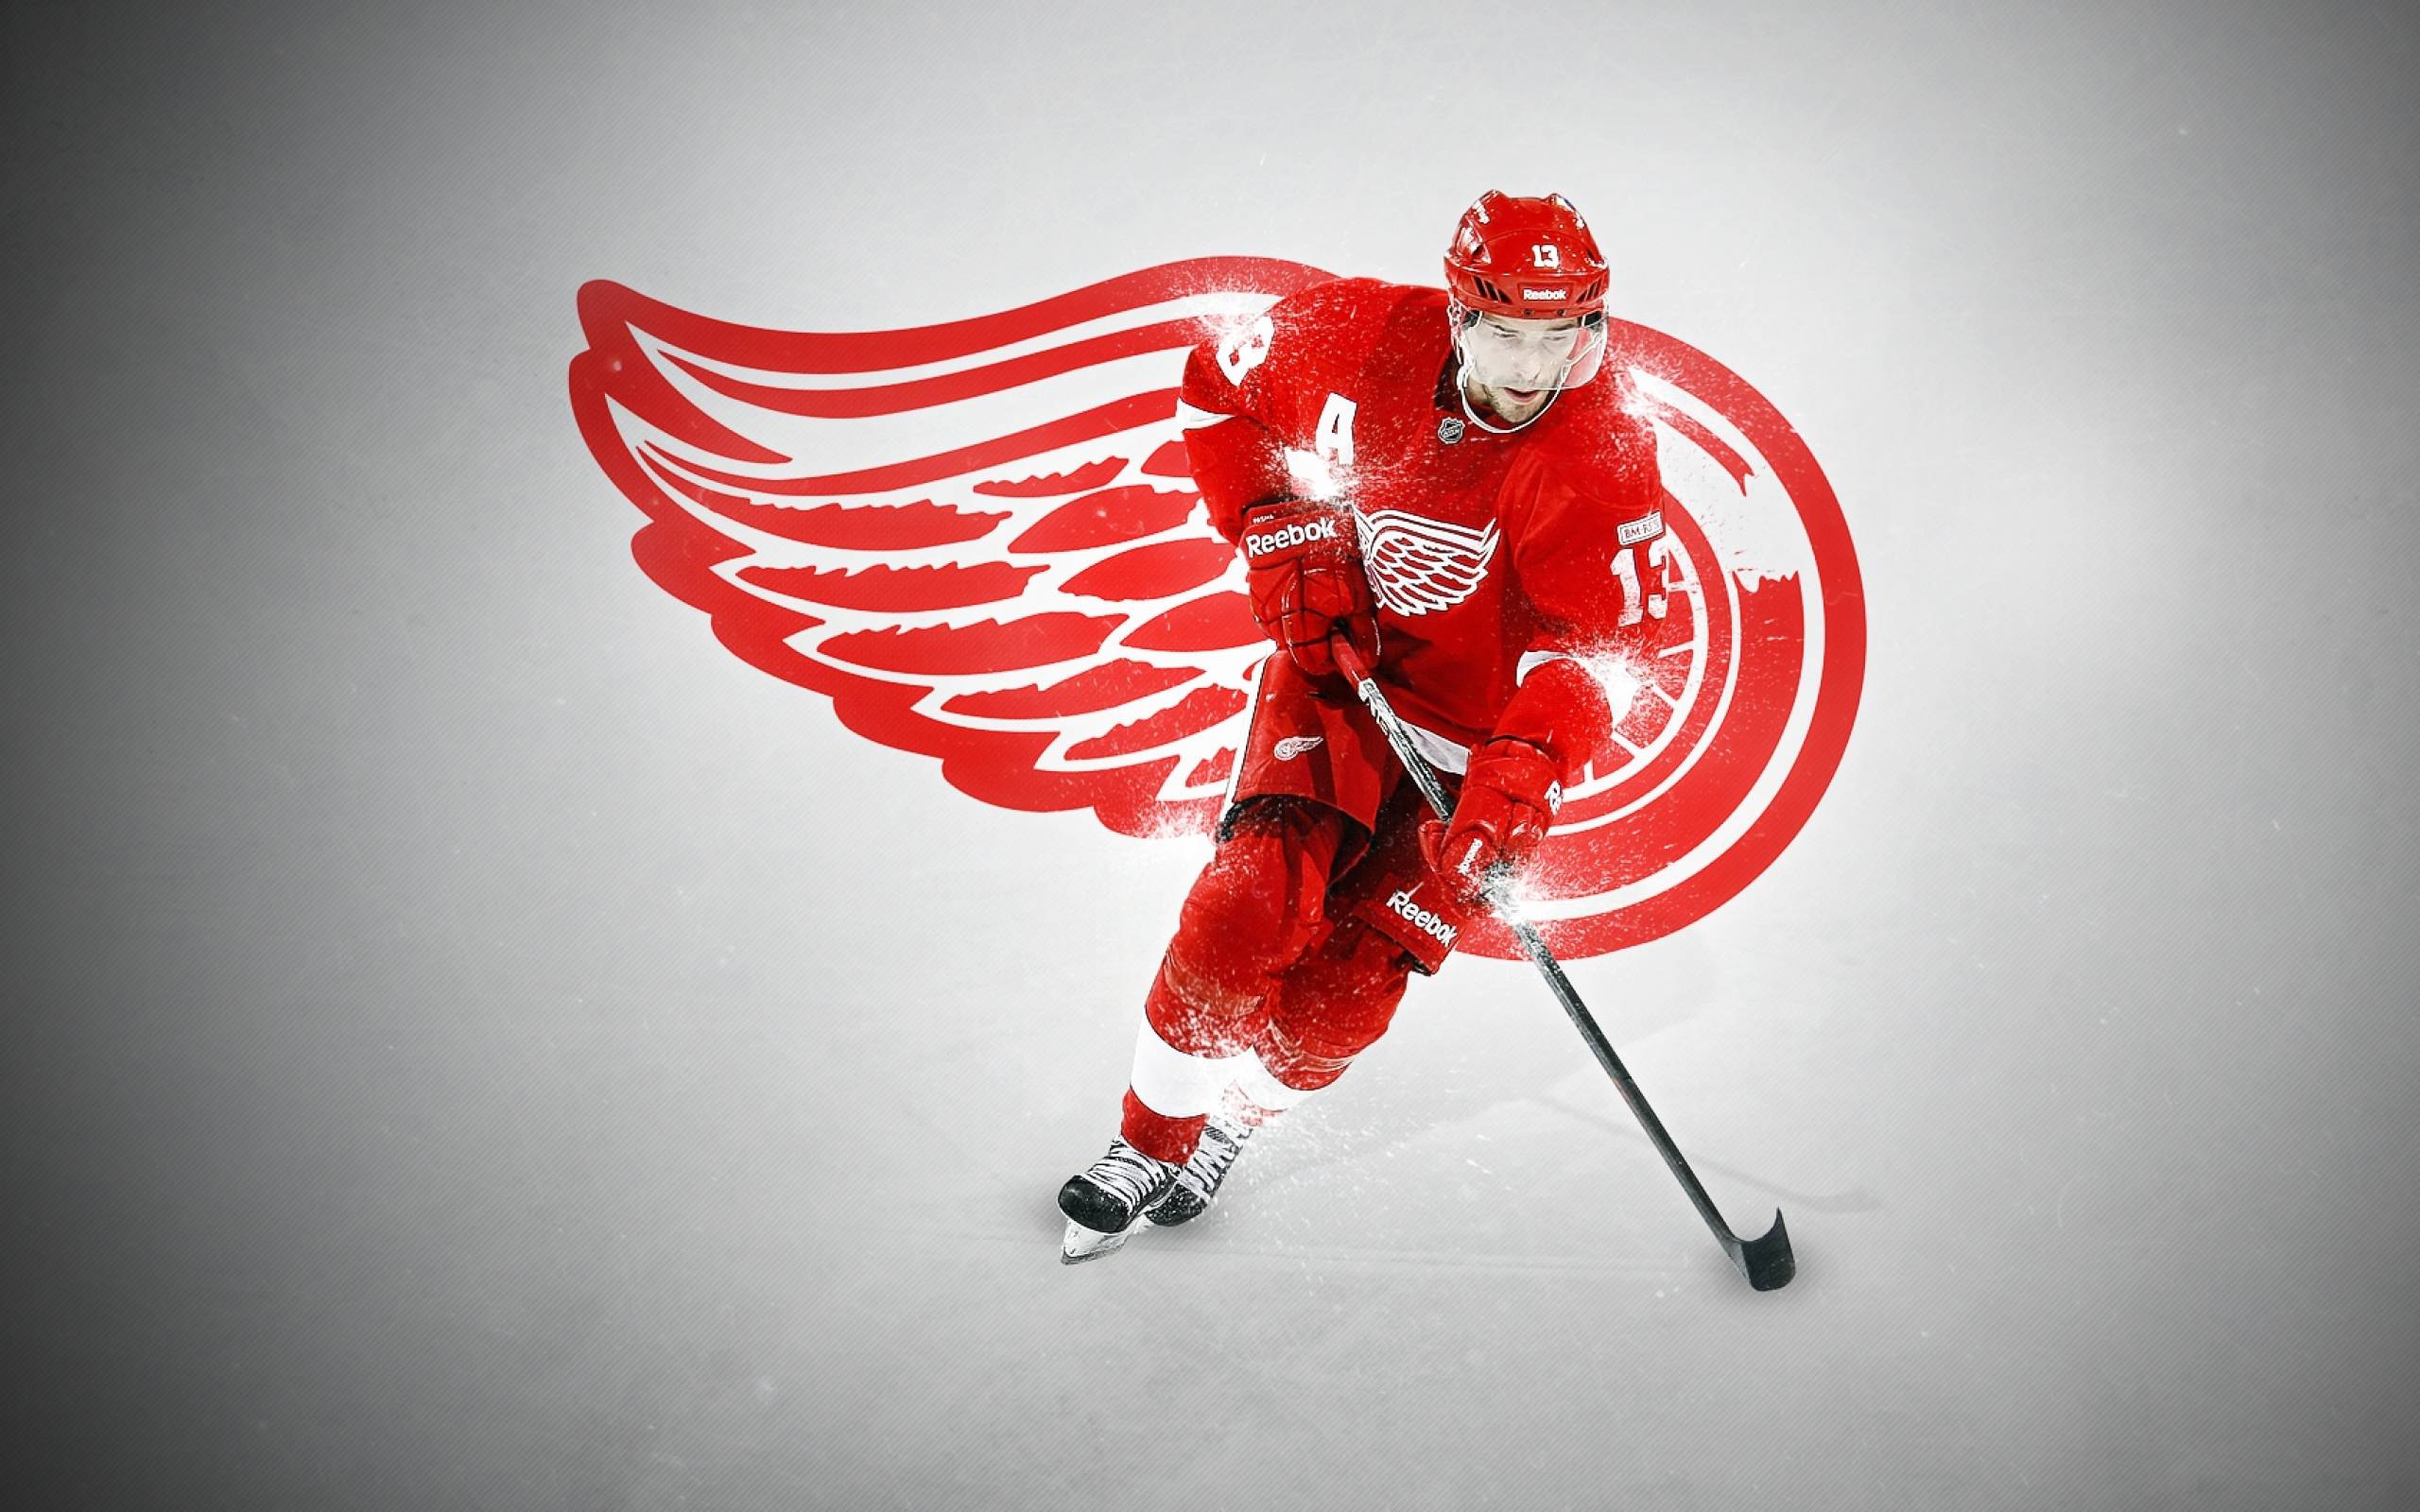 Download Free Detroit Red Wings